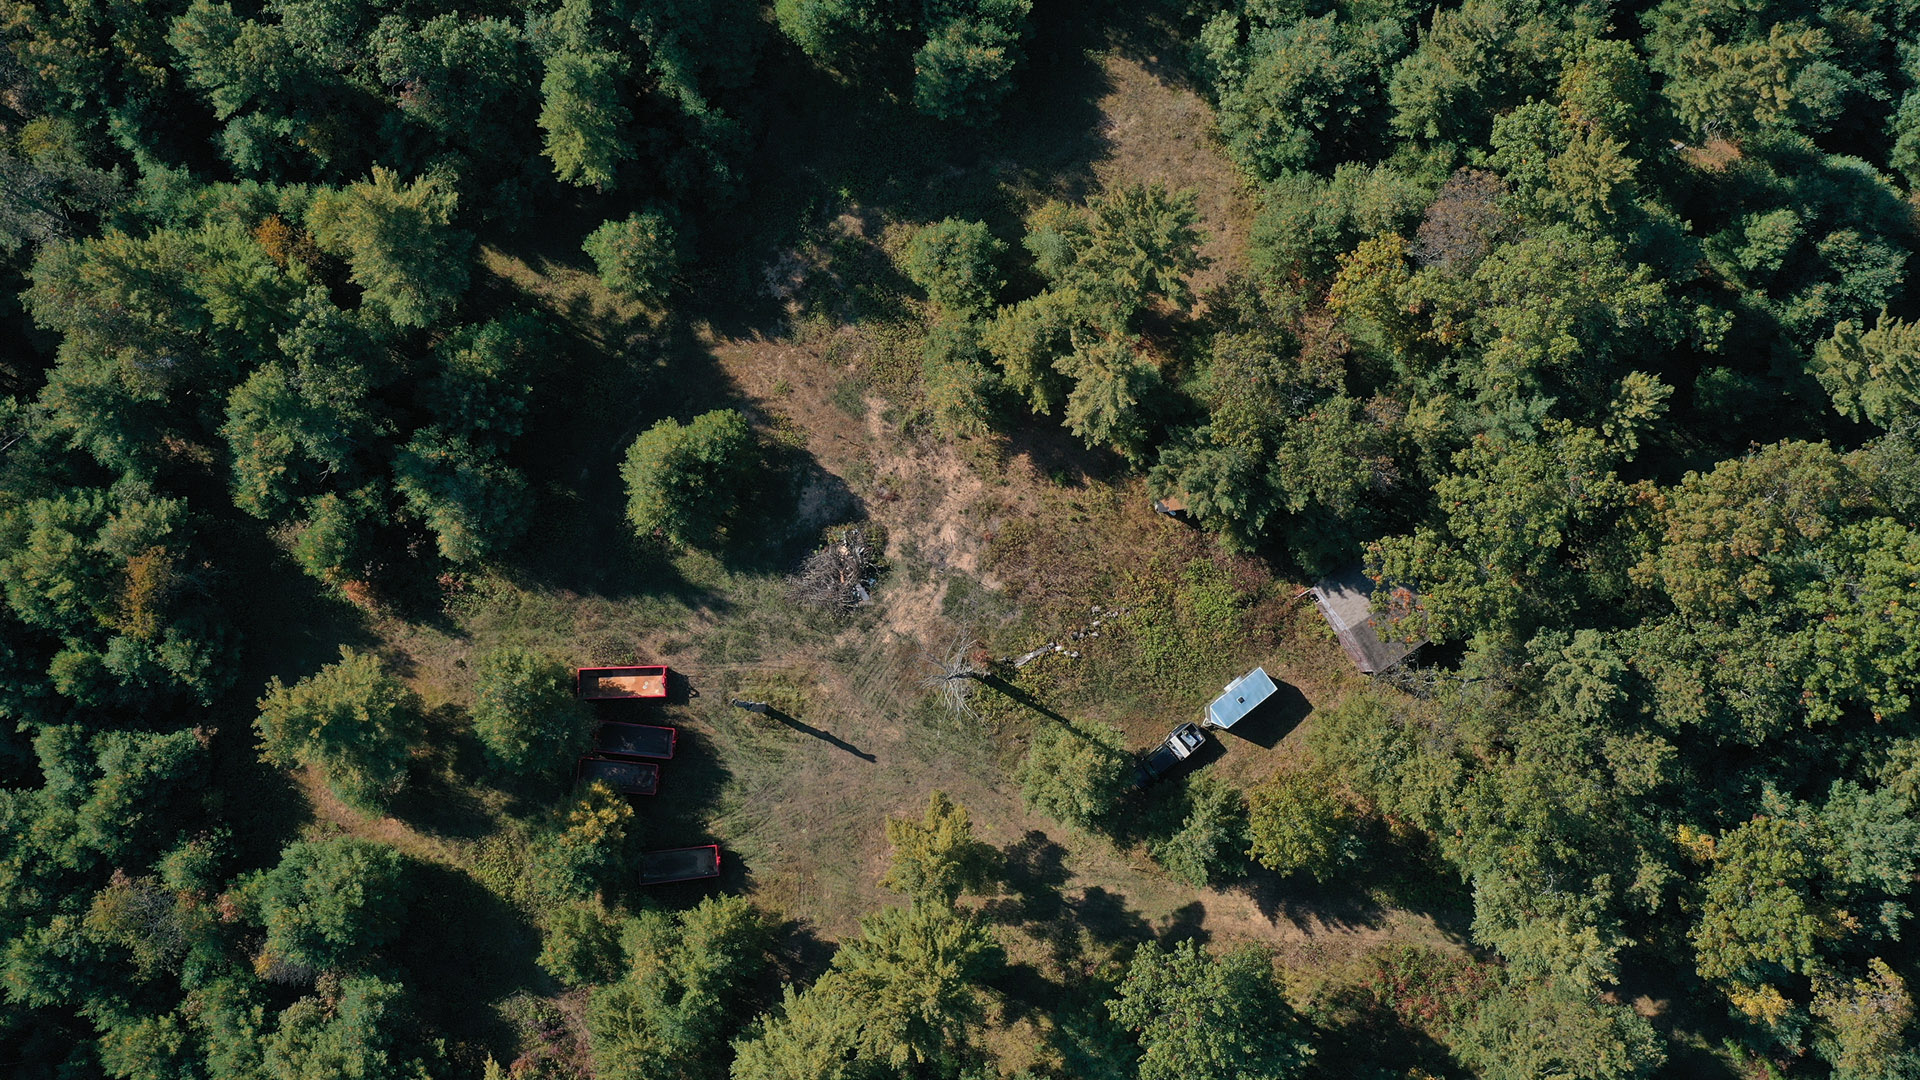 An aerial photo shows a clearing in a wooded area with multiple construction dumpsters and vehicles, with exposed soil at its center.